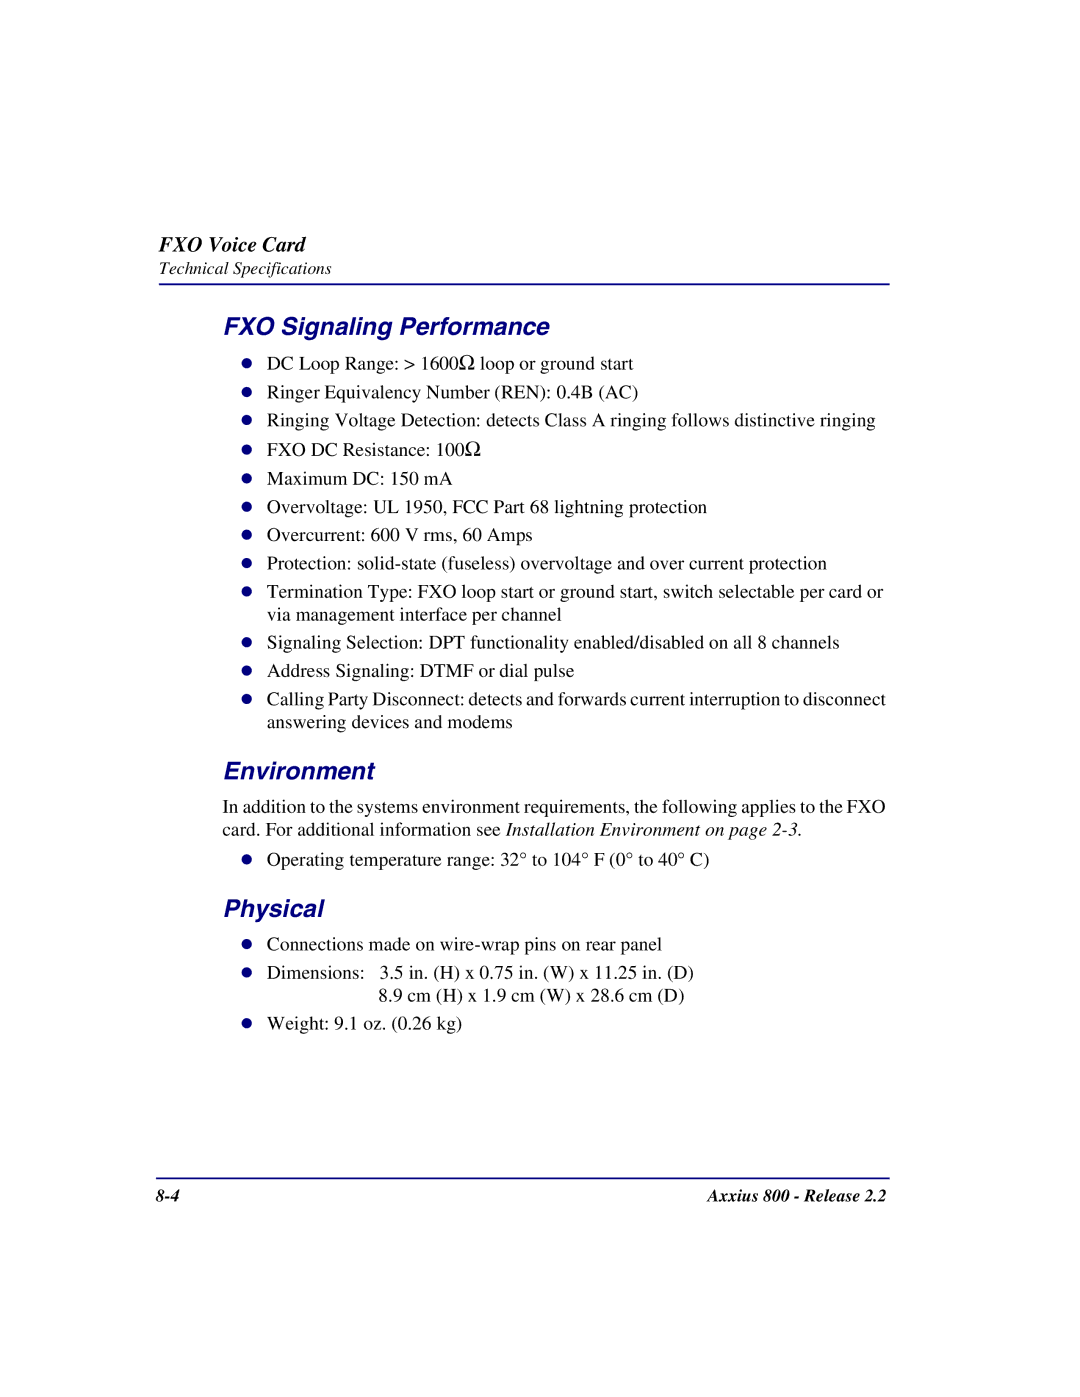 Carrier Access Axxius 800 user manual FXO Signaling Performance, Environment 